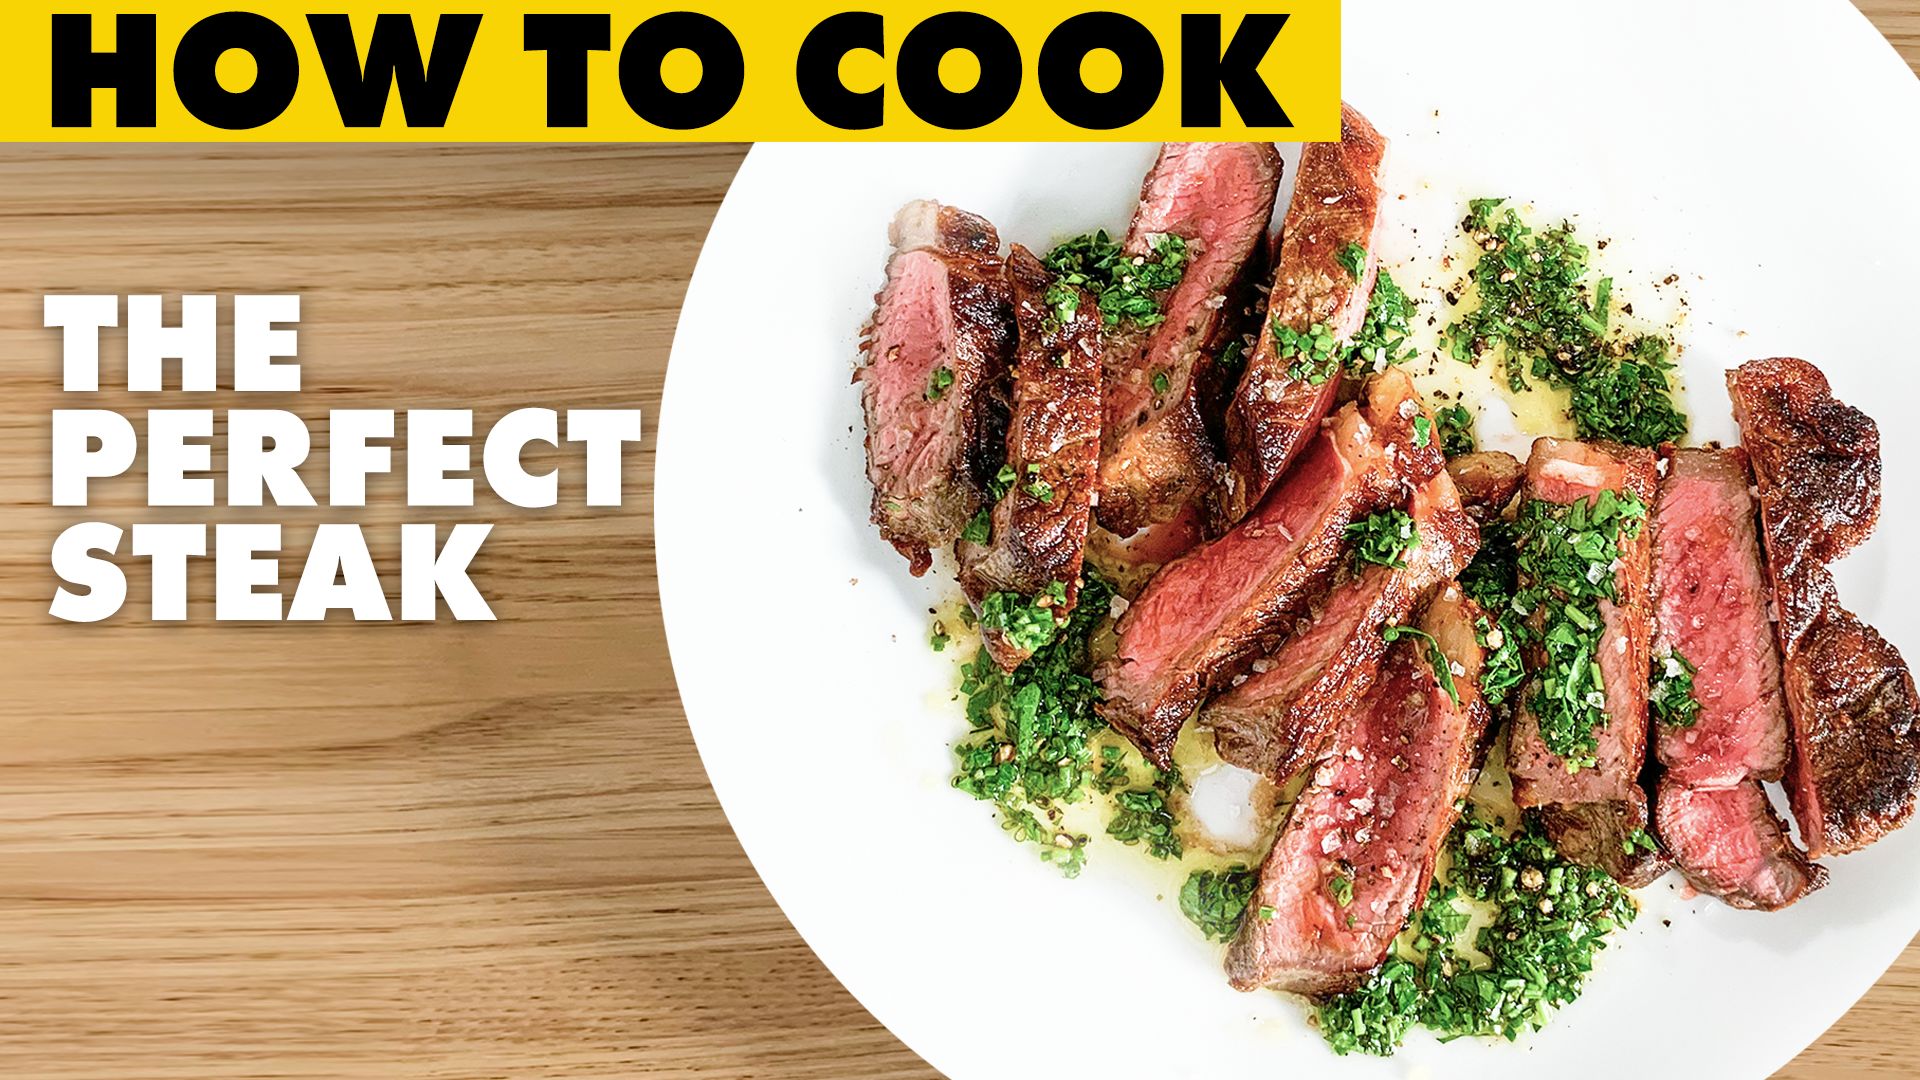 Your Ultimate Guide to Cooking the Perfect Steak